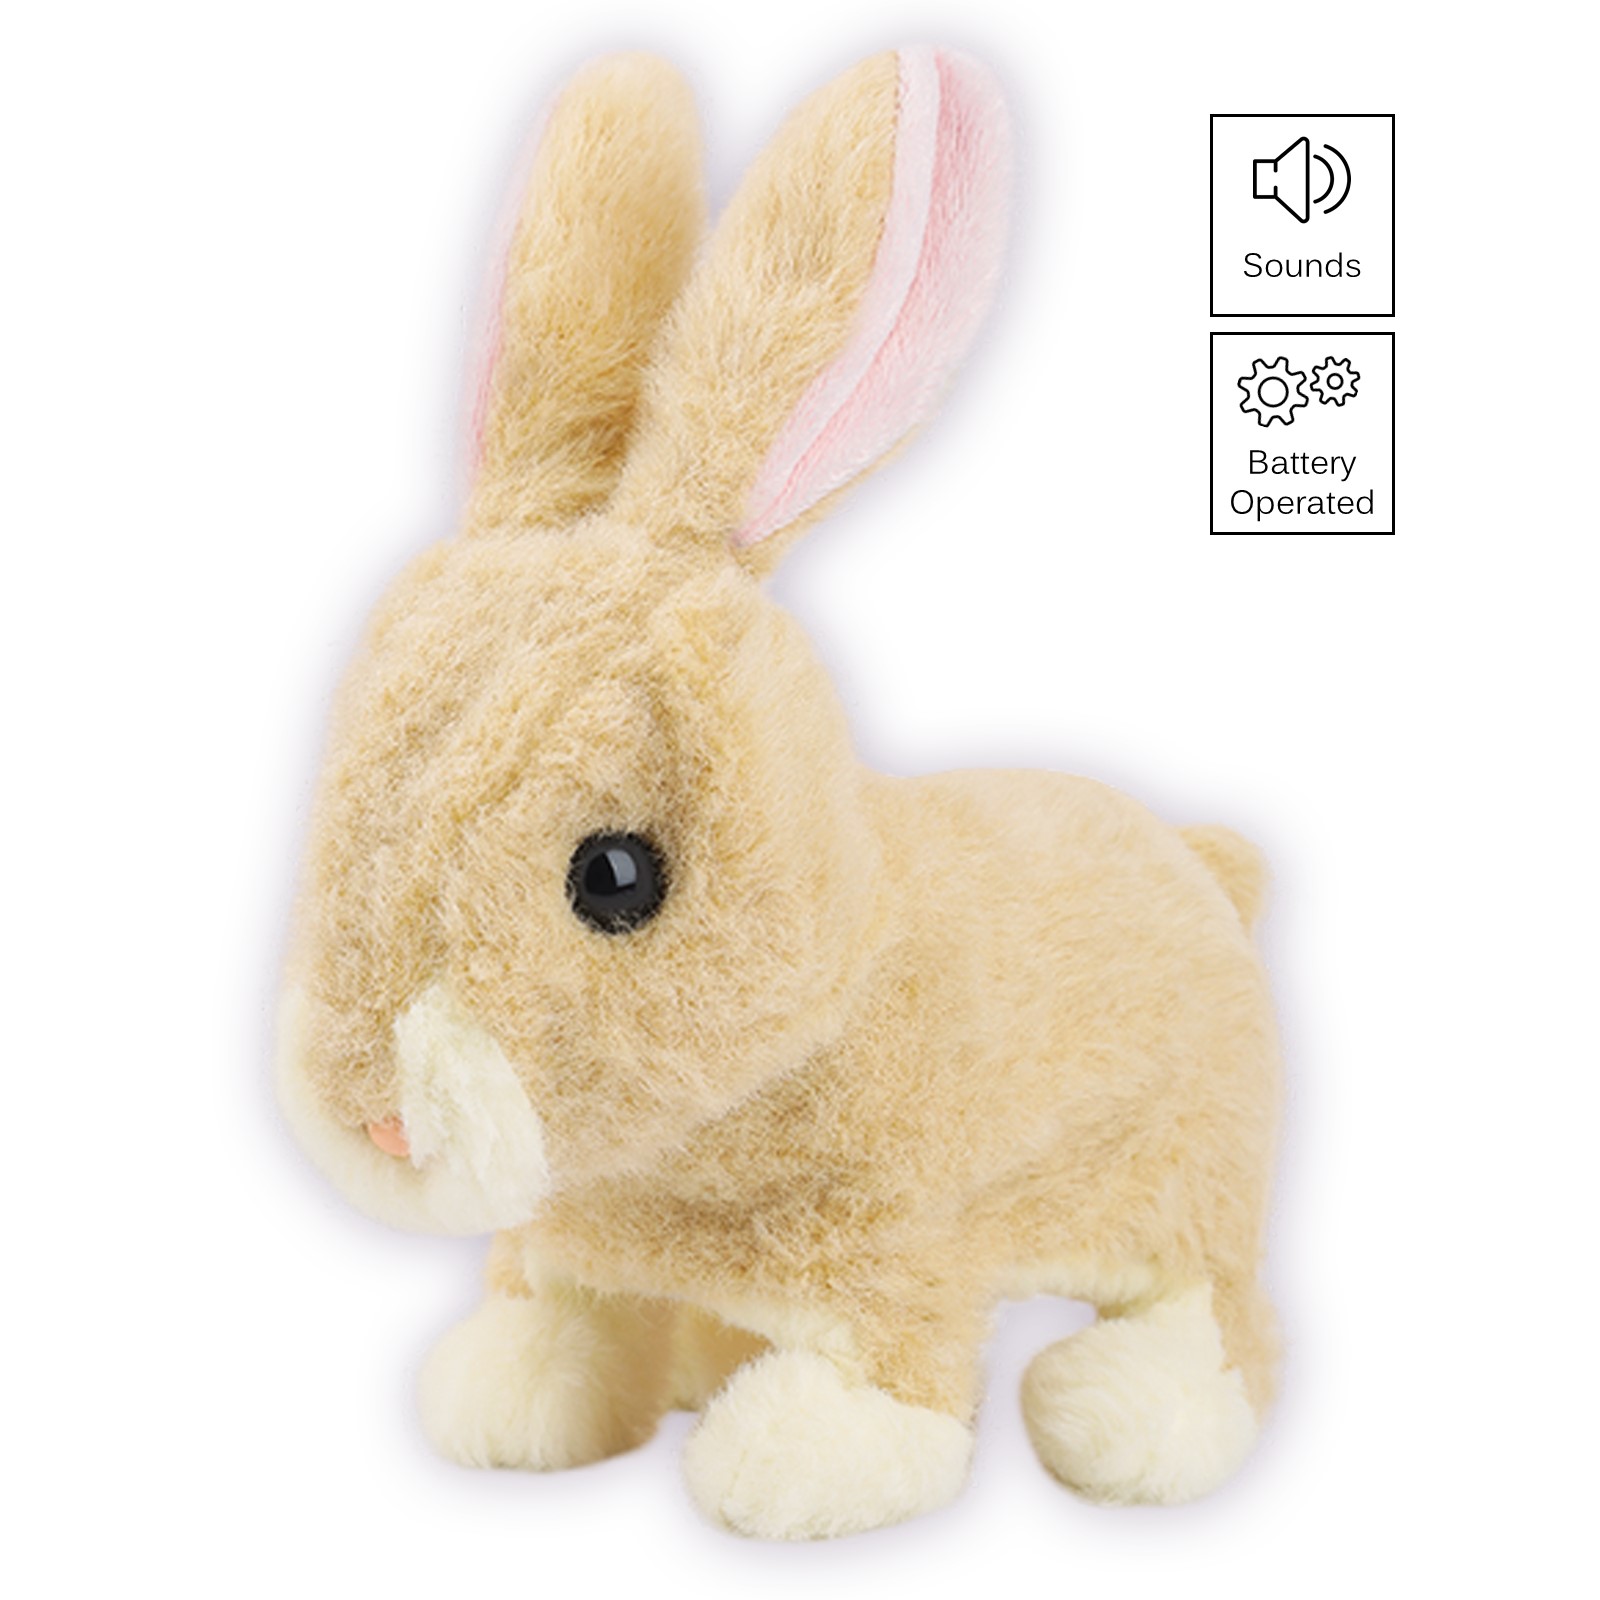 Playful Bunny Hops Around Makes Sounds Wiggles Ears And Nose Cute Interactive Rabbit Kids Soft Cuddly Electronic Pet Battery Toy Animal Great Gift For Preschool Children Boy Girl Toddler Easter Brown TC-31-BR